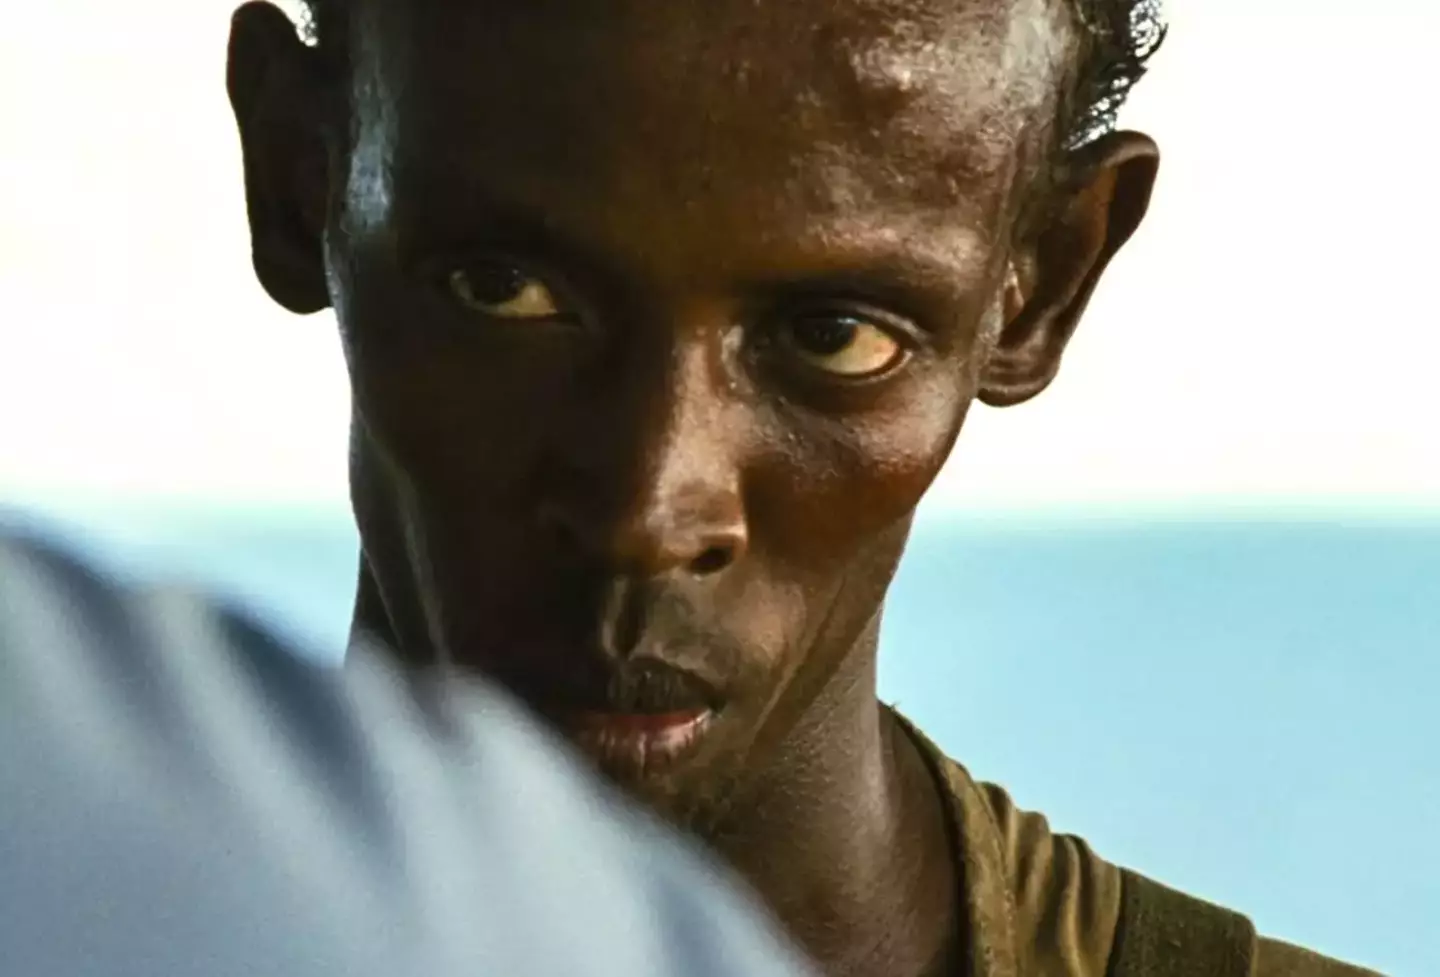 Barkhad Adbi was cast in Captain Phillips following an open casting call.